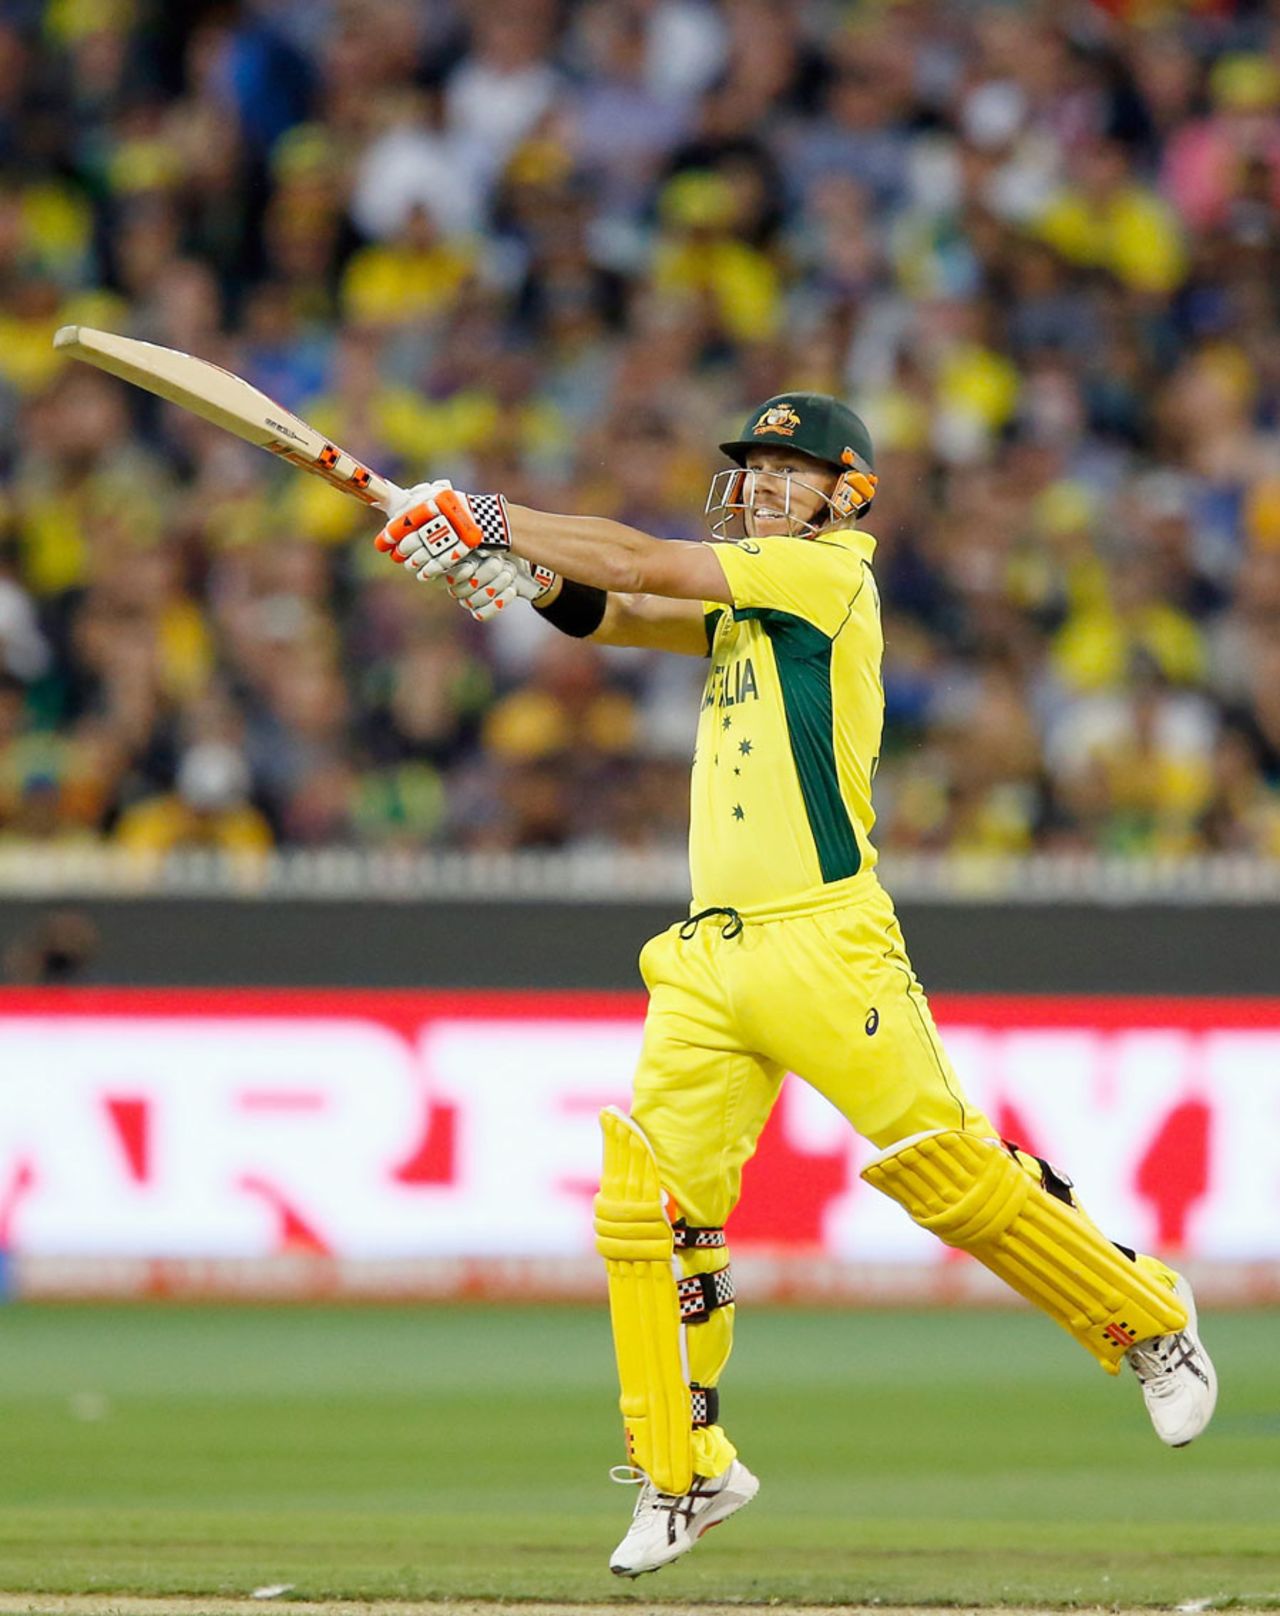 David Warner gets off his toes and plays a shot, Australia v New Zealand, World Cup 2015, final, Melbourne, March 29, 2015